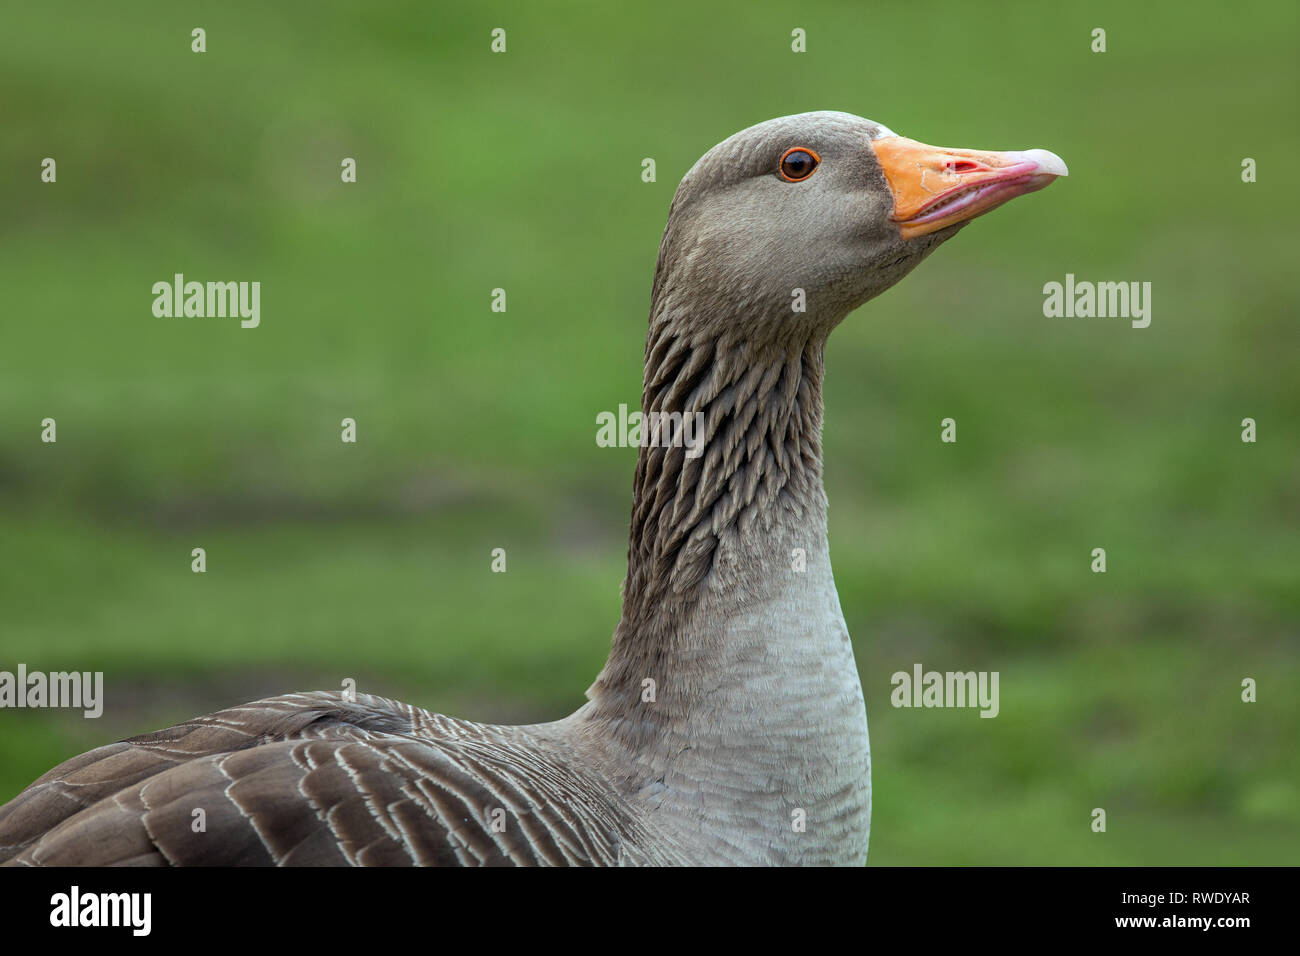 ​Western Greylag Goose (Anser anser). Head up, cautionary, mild threat. Side view showing orange bill colour and eye lid ring. Striated, furrowed, grooved,  neck feathers. Vibrated showing disposition towards others. Stock Photo